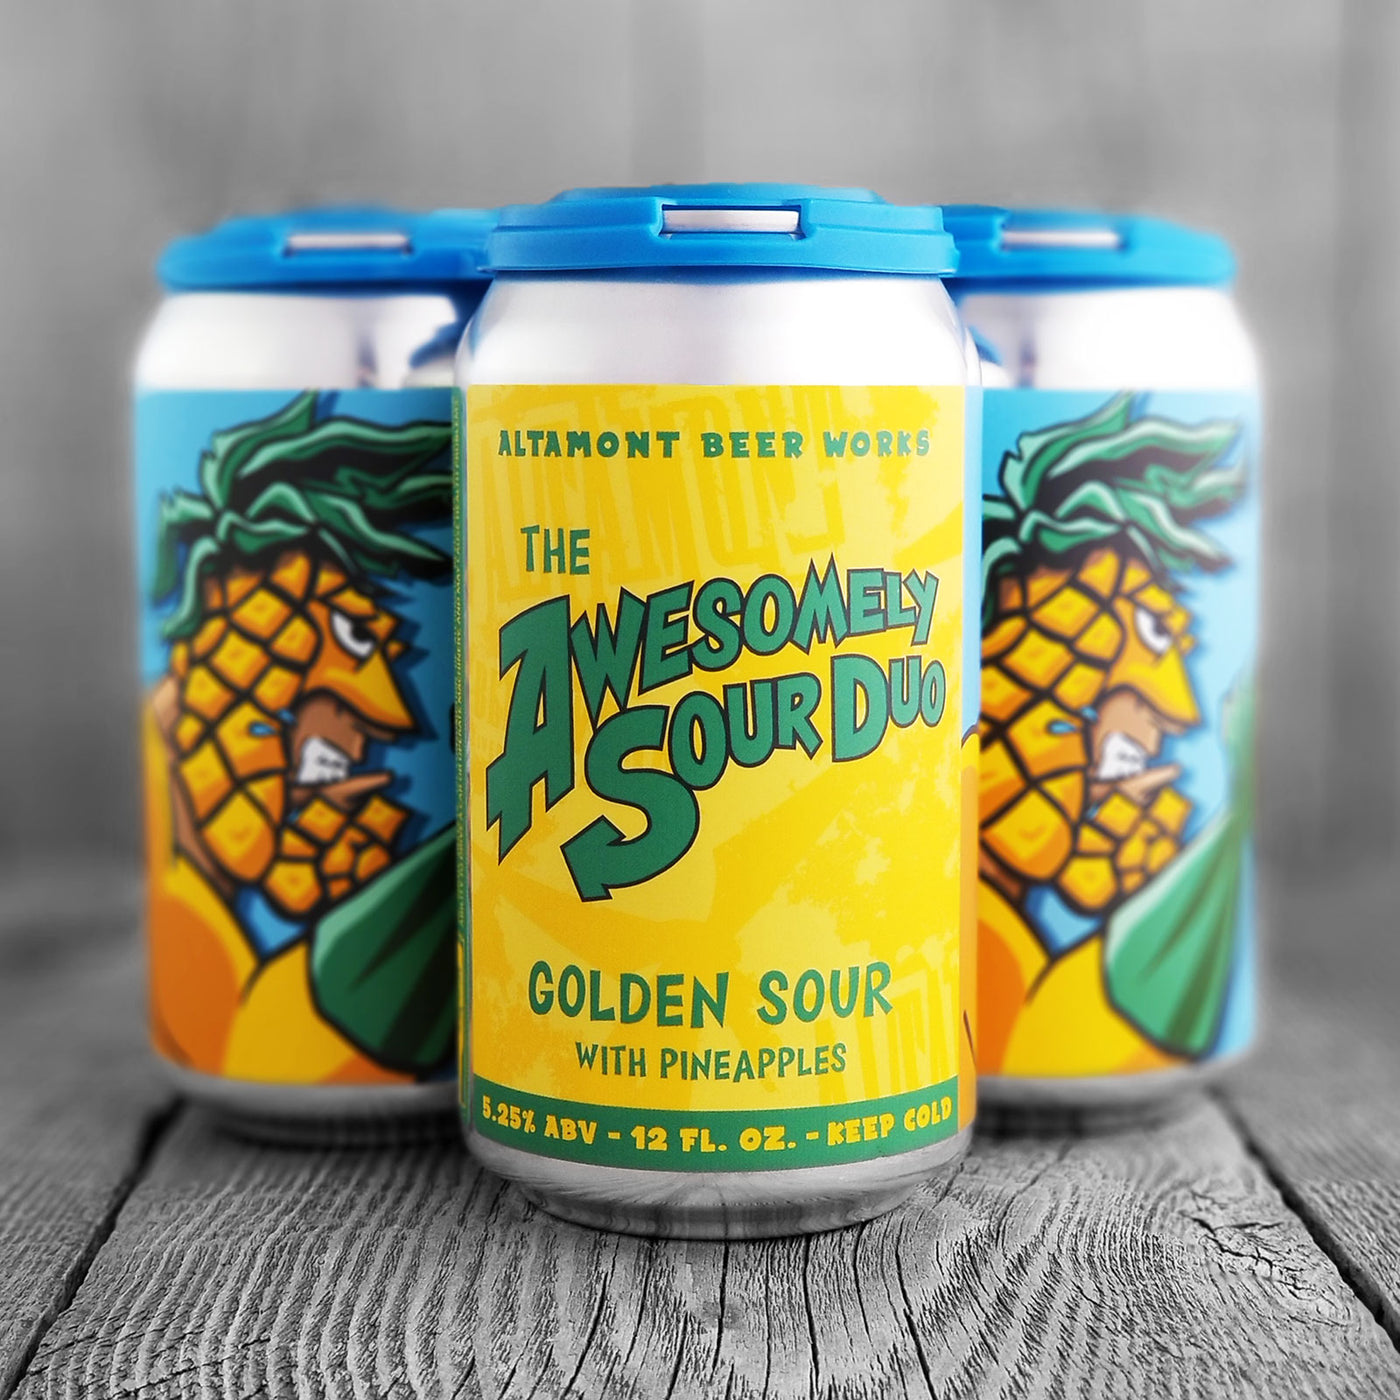 Altamont Awesomely Sour Duo With Pineapple